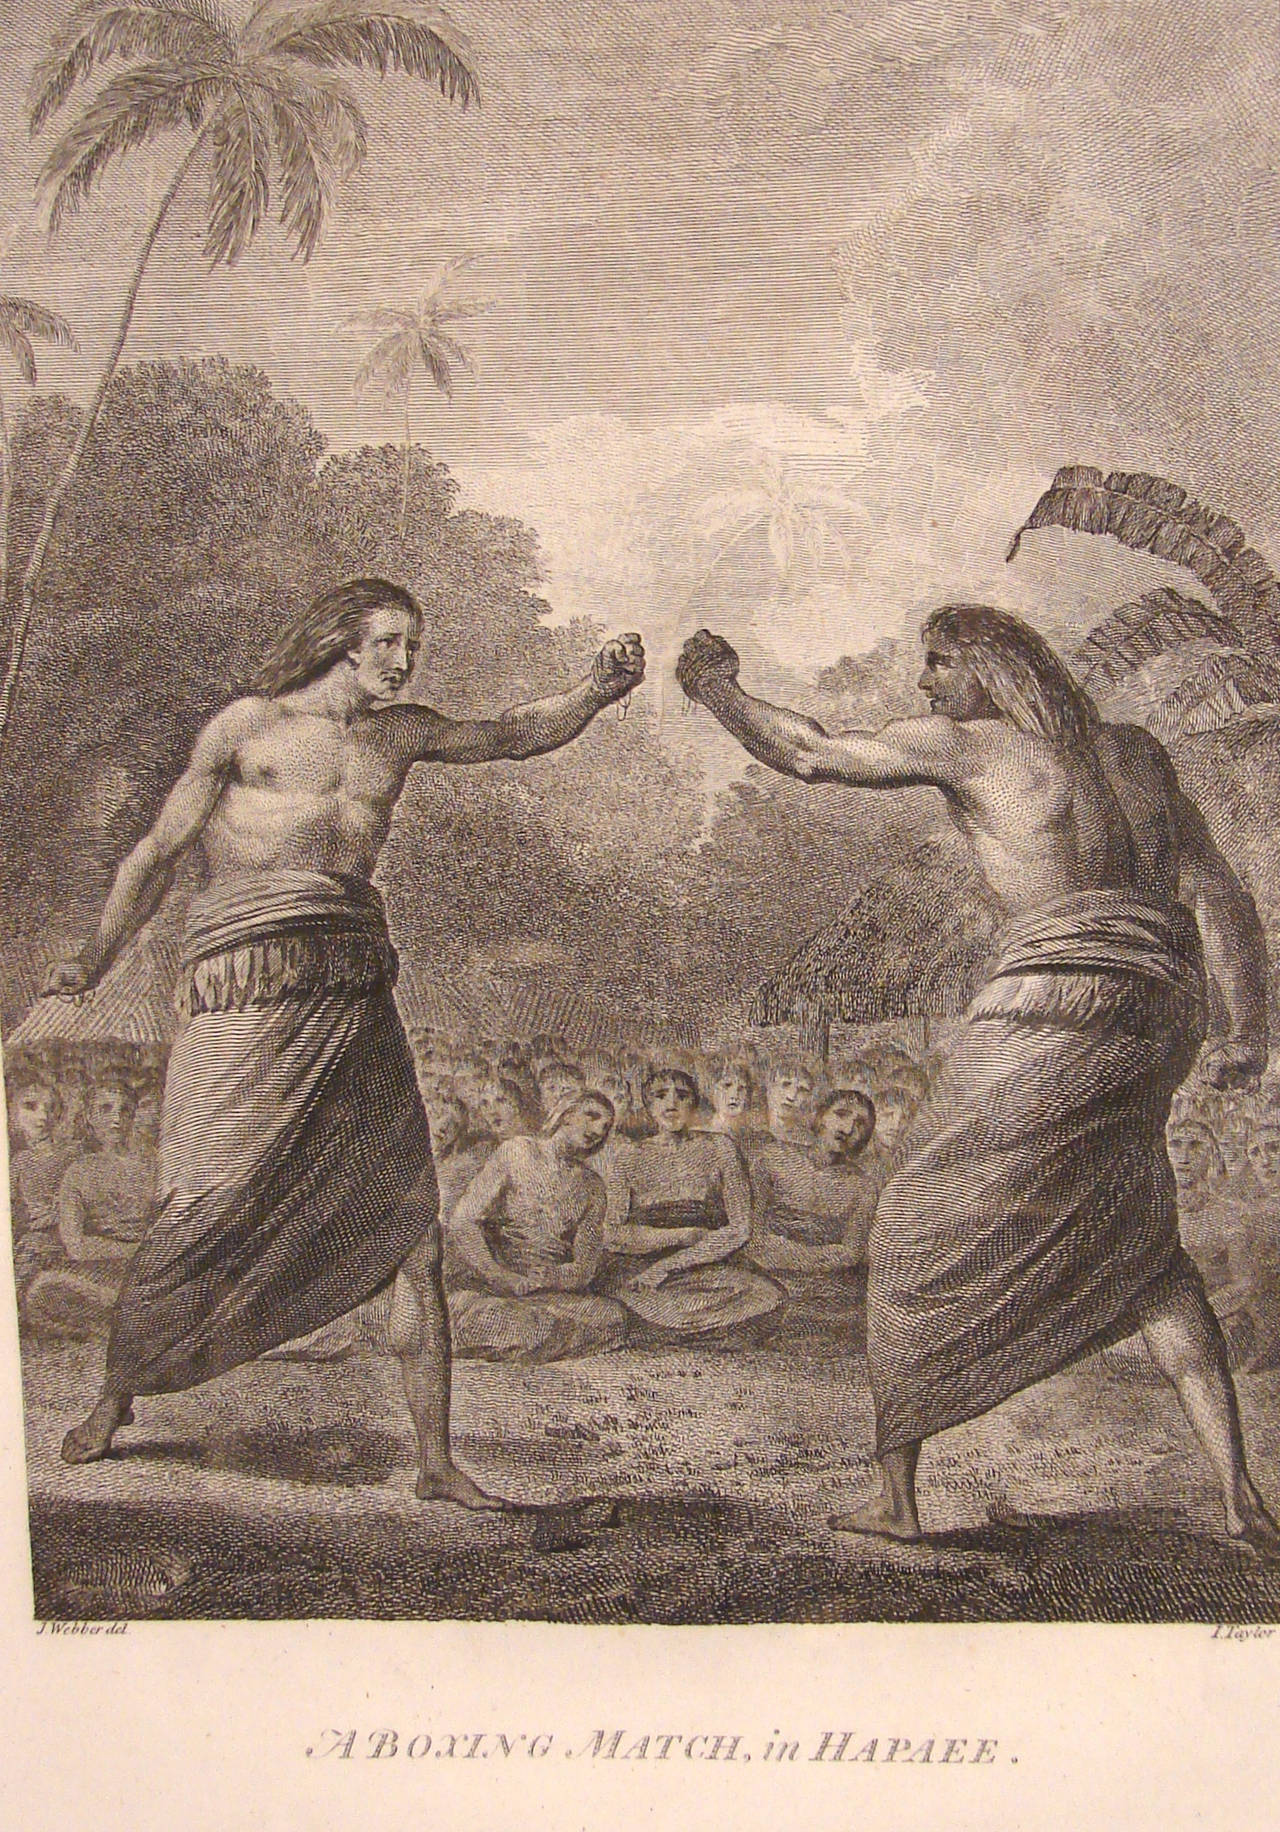 J. Webber: A boxing match in Hapaee (Hawaii). An original copper plate engraving on paper depicting a boxing match as witnessed during Cook's third voyage. John Webber was the official artist on Cook's final voyage through the Pacific and his